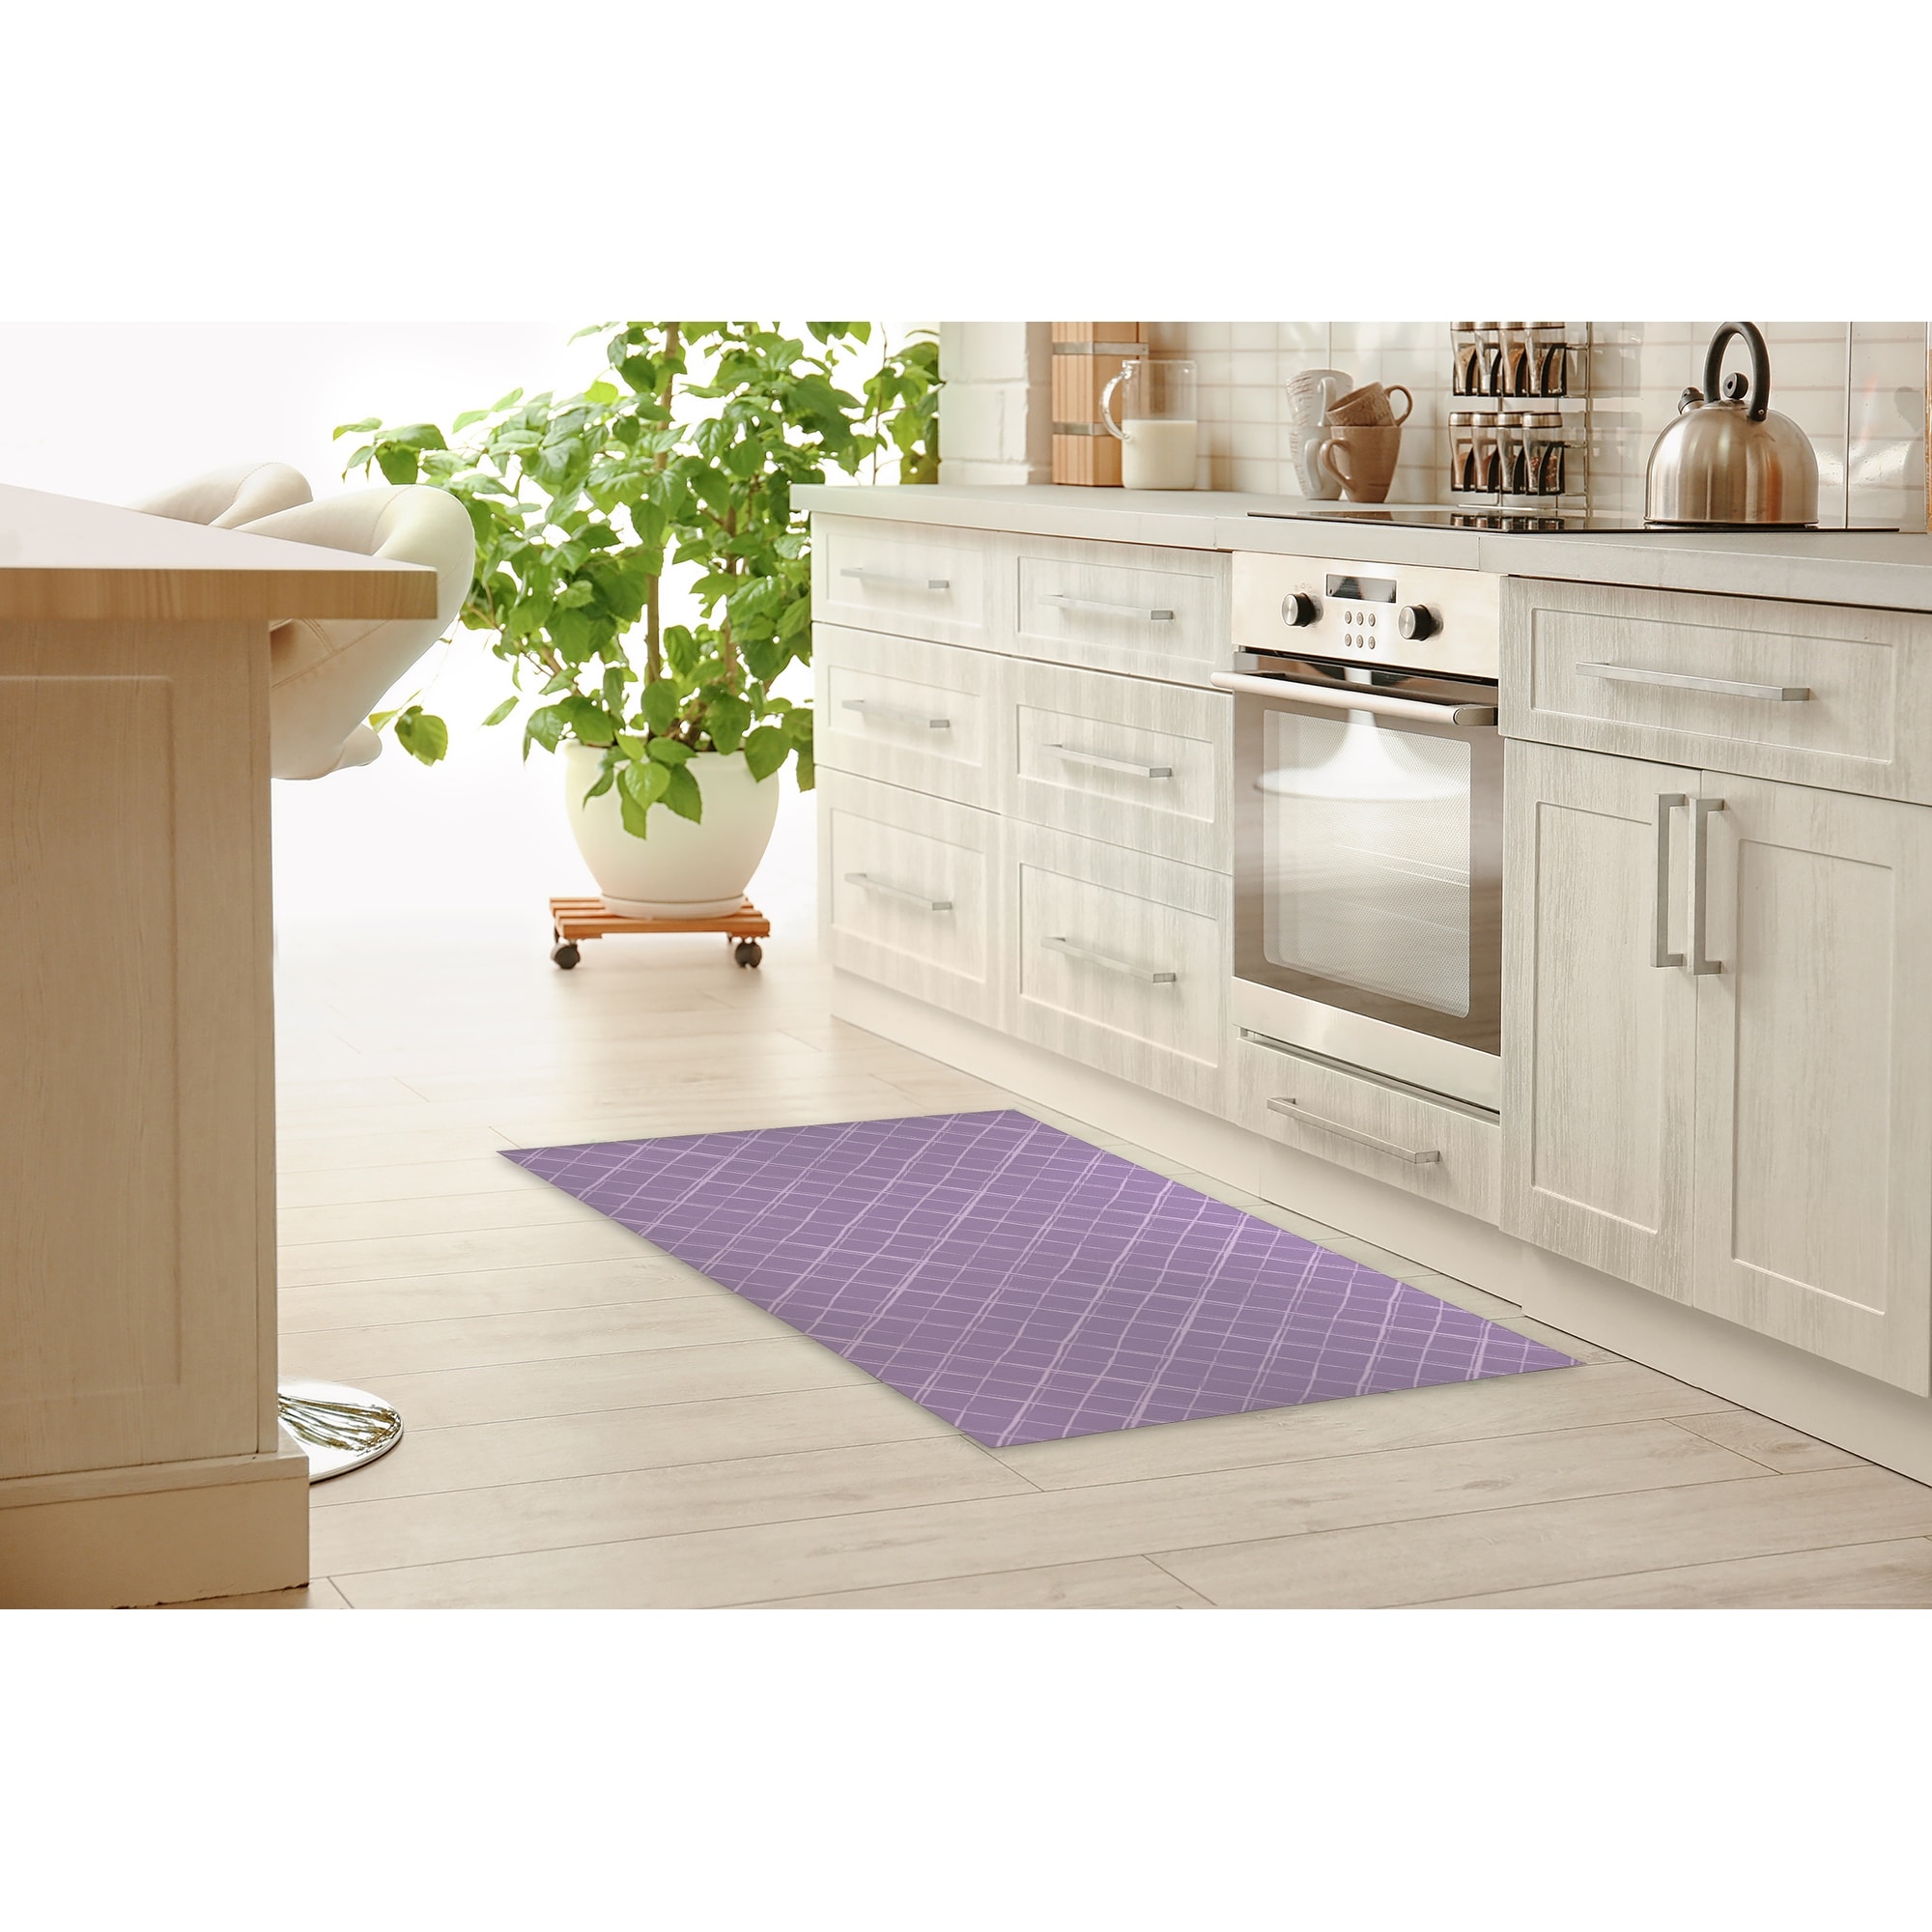 https://ak1.ostkcdn.com/images/products/is/images/direct/7ca38010a1a9e30128fc6de92c8bfc5ba2e28b8e/PANES-LAVENDER-Kitchen-Mat-By-Kavka-Designs.jpg